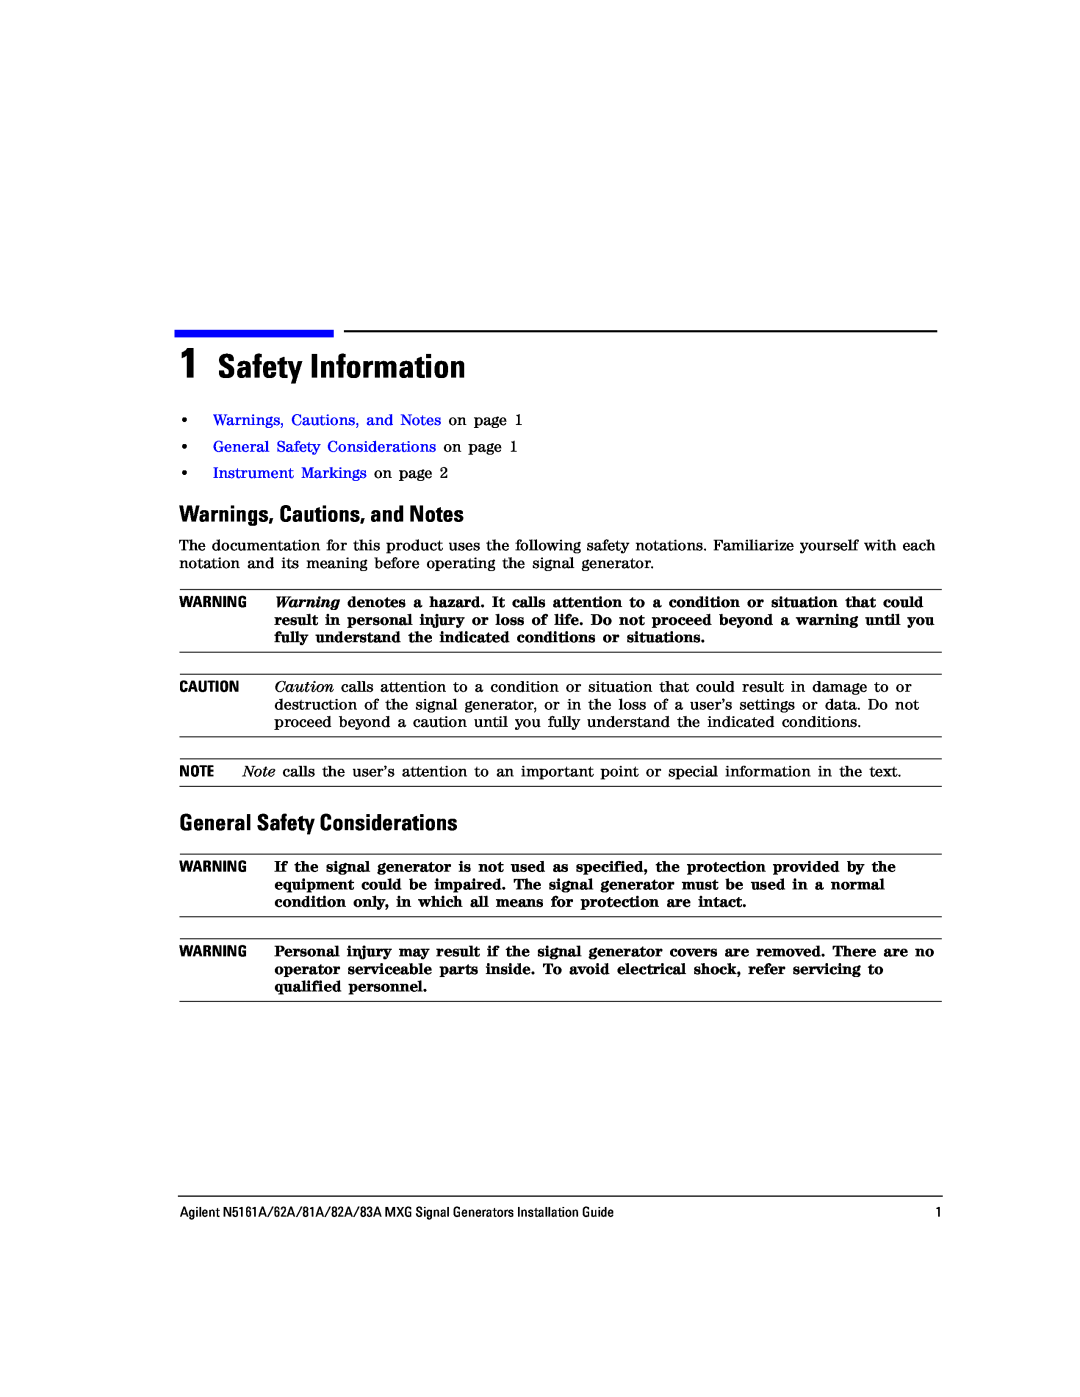 Agilent Technologies 83A, N5161A, 62A, 82A Safety Information, Warnings, Cautions, and Notes, General Safety Considerations 